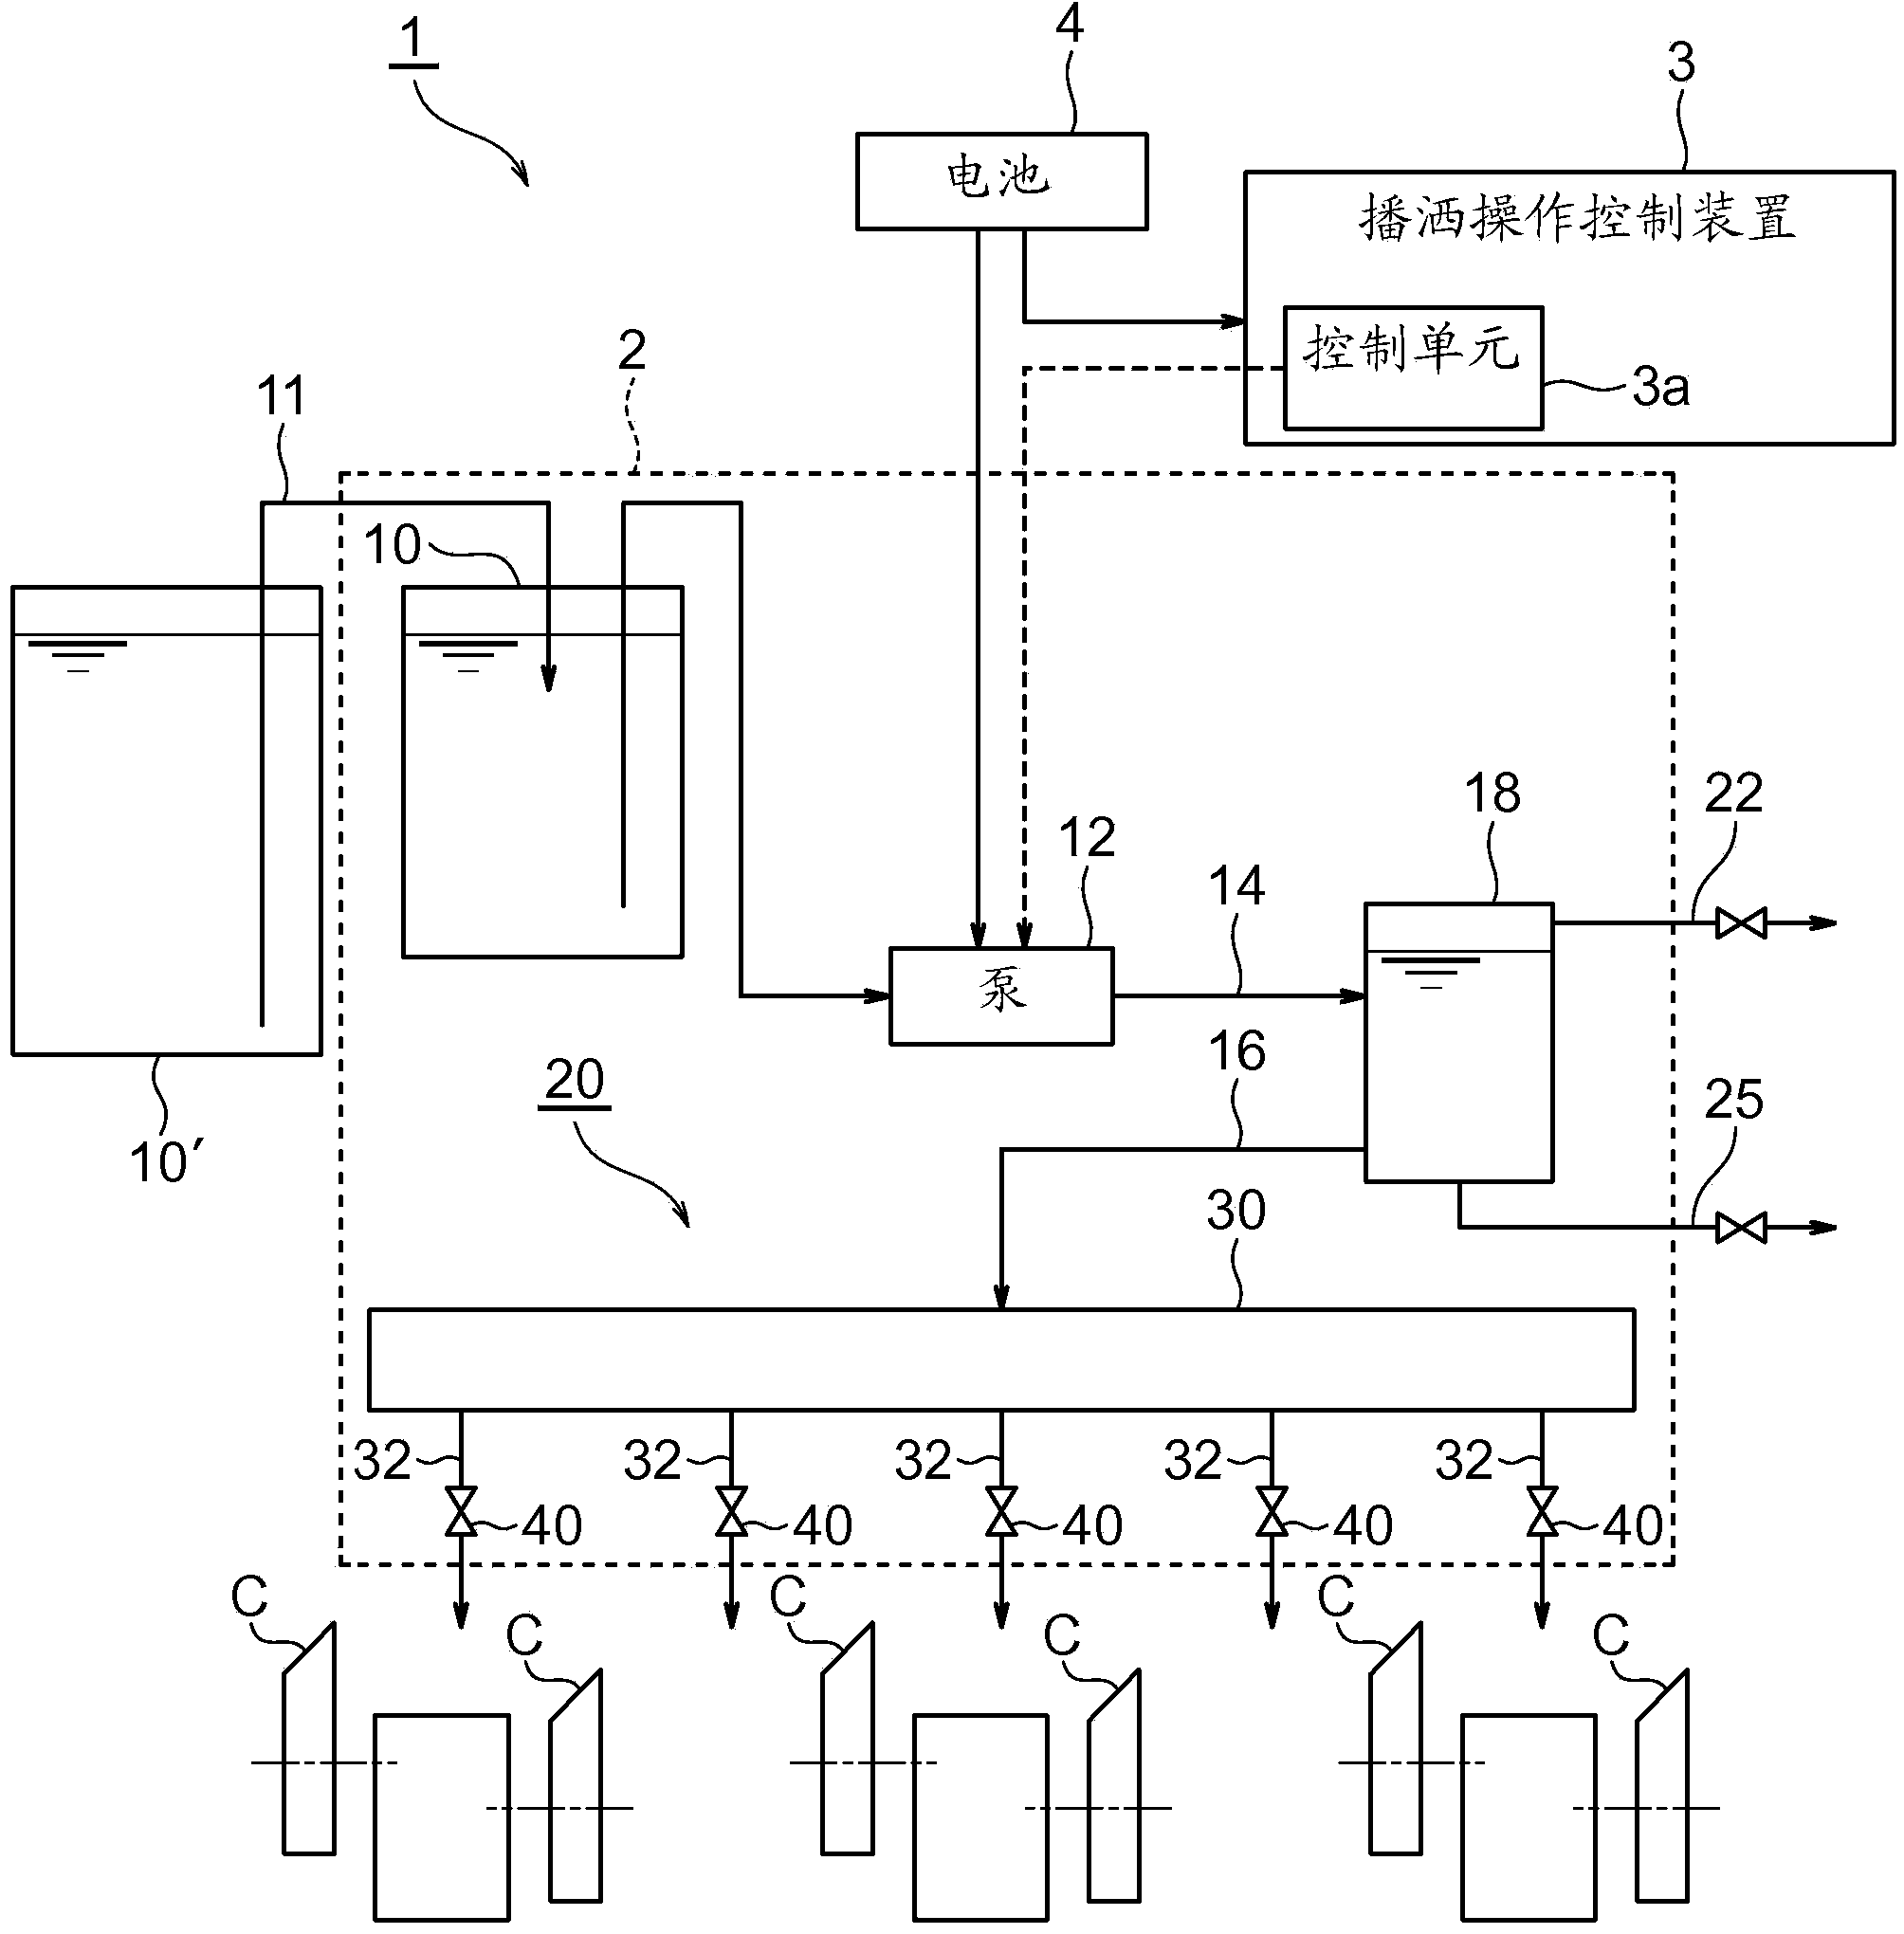 Rice transplanter-mounted liquid reagent application device, and method of applying liquid reagent during rice planting using same